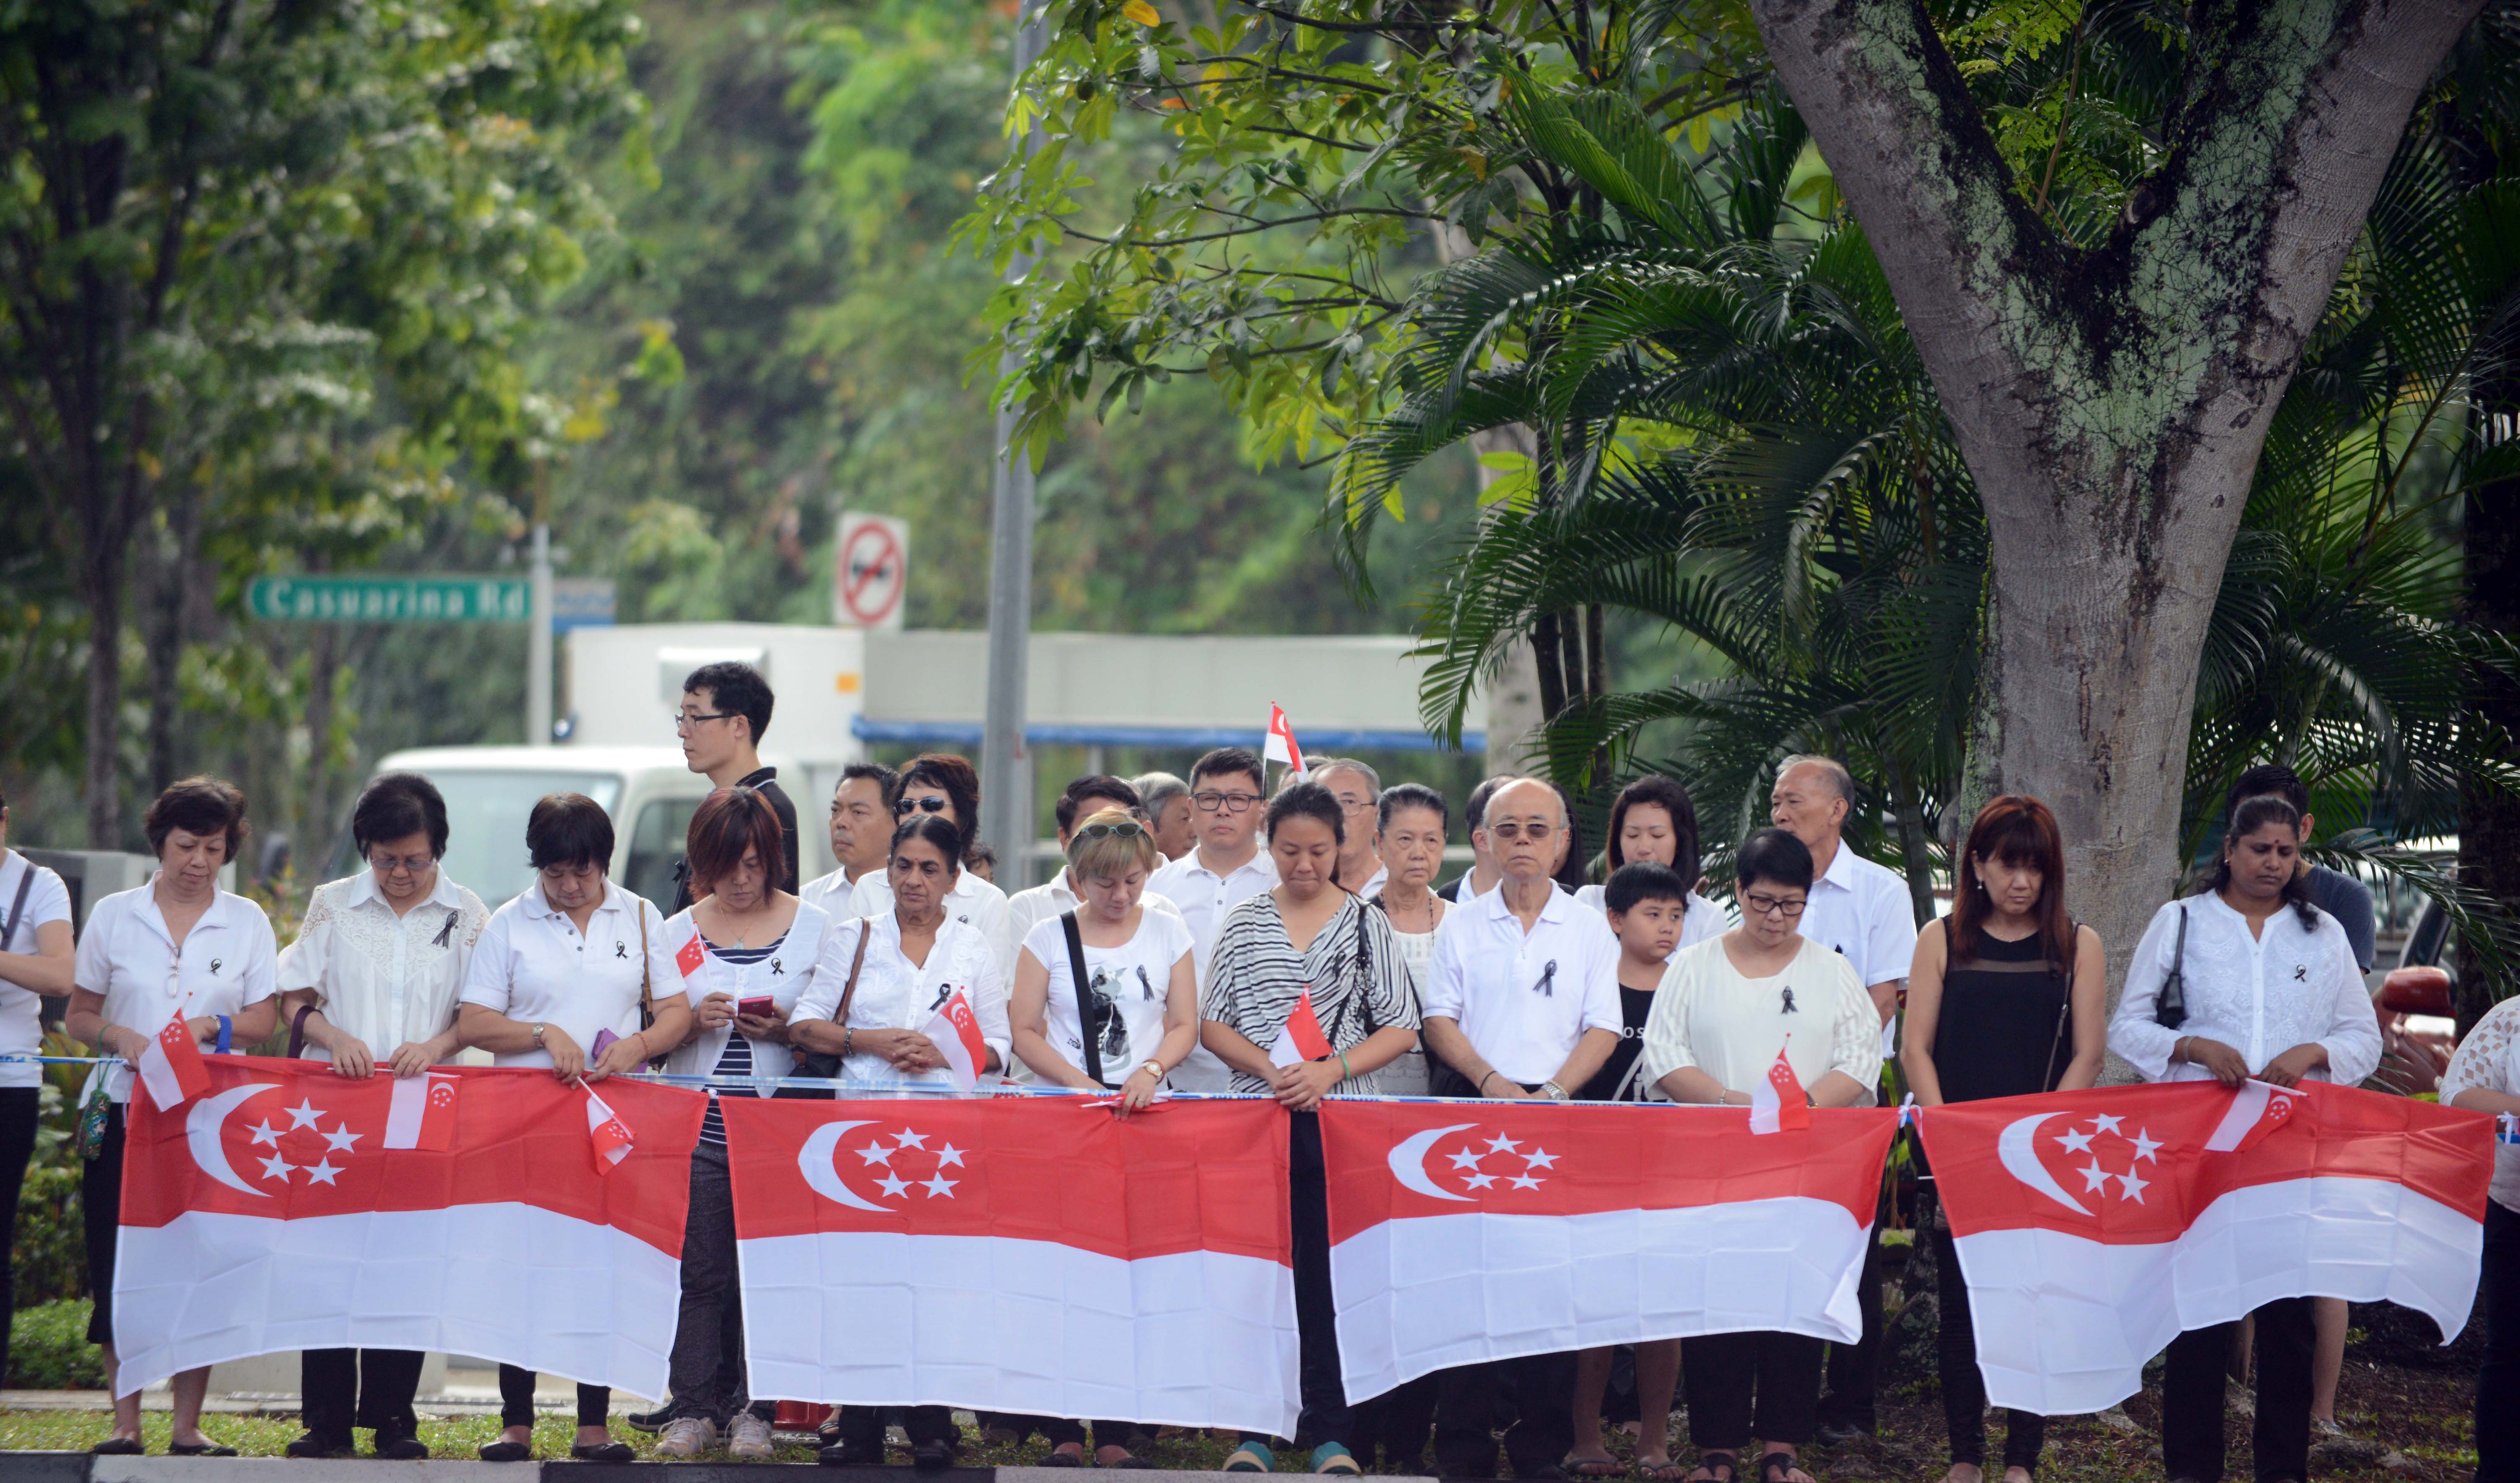 People in Singapore observe a minute's silence on Sunday to mourn the late Lee Kuan Yew. Through competitive elections, Singaporean voters have the power to decide if the PAP should stay in power. Photo: AFP